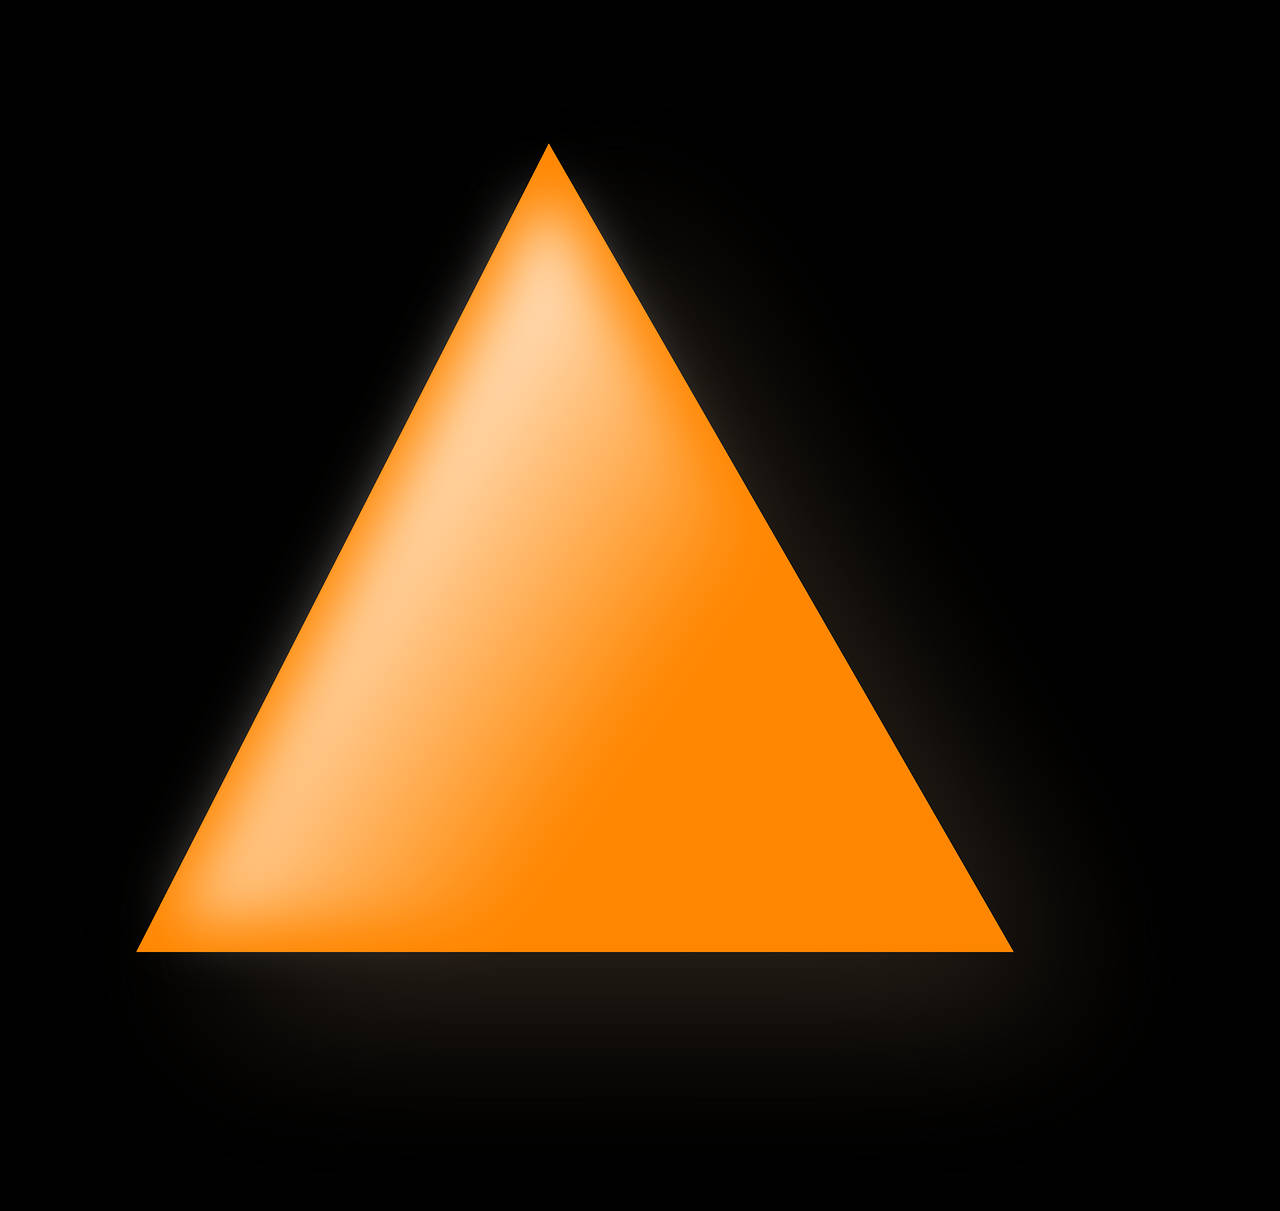 Glossy Orange Triangle With Shadow Wallpaper